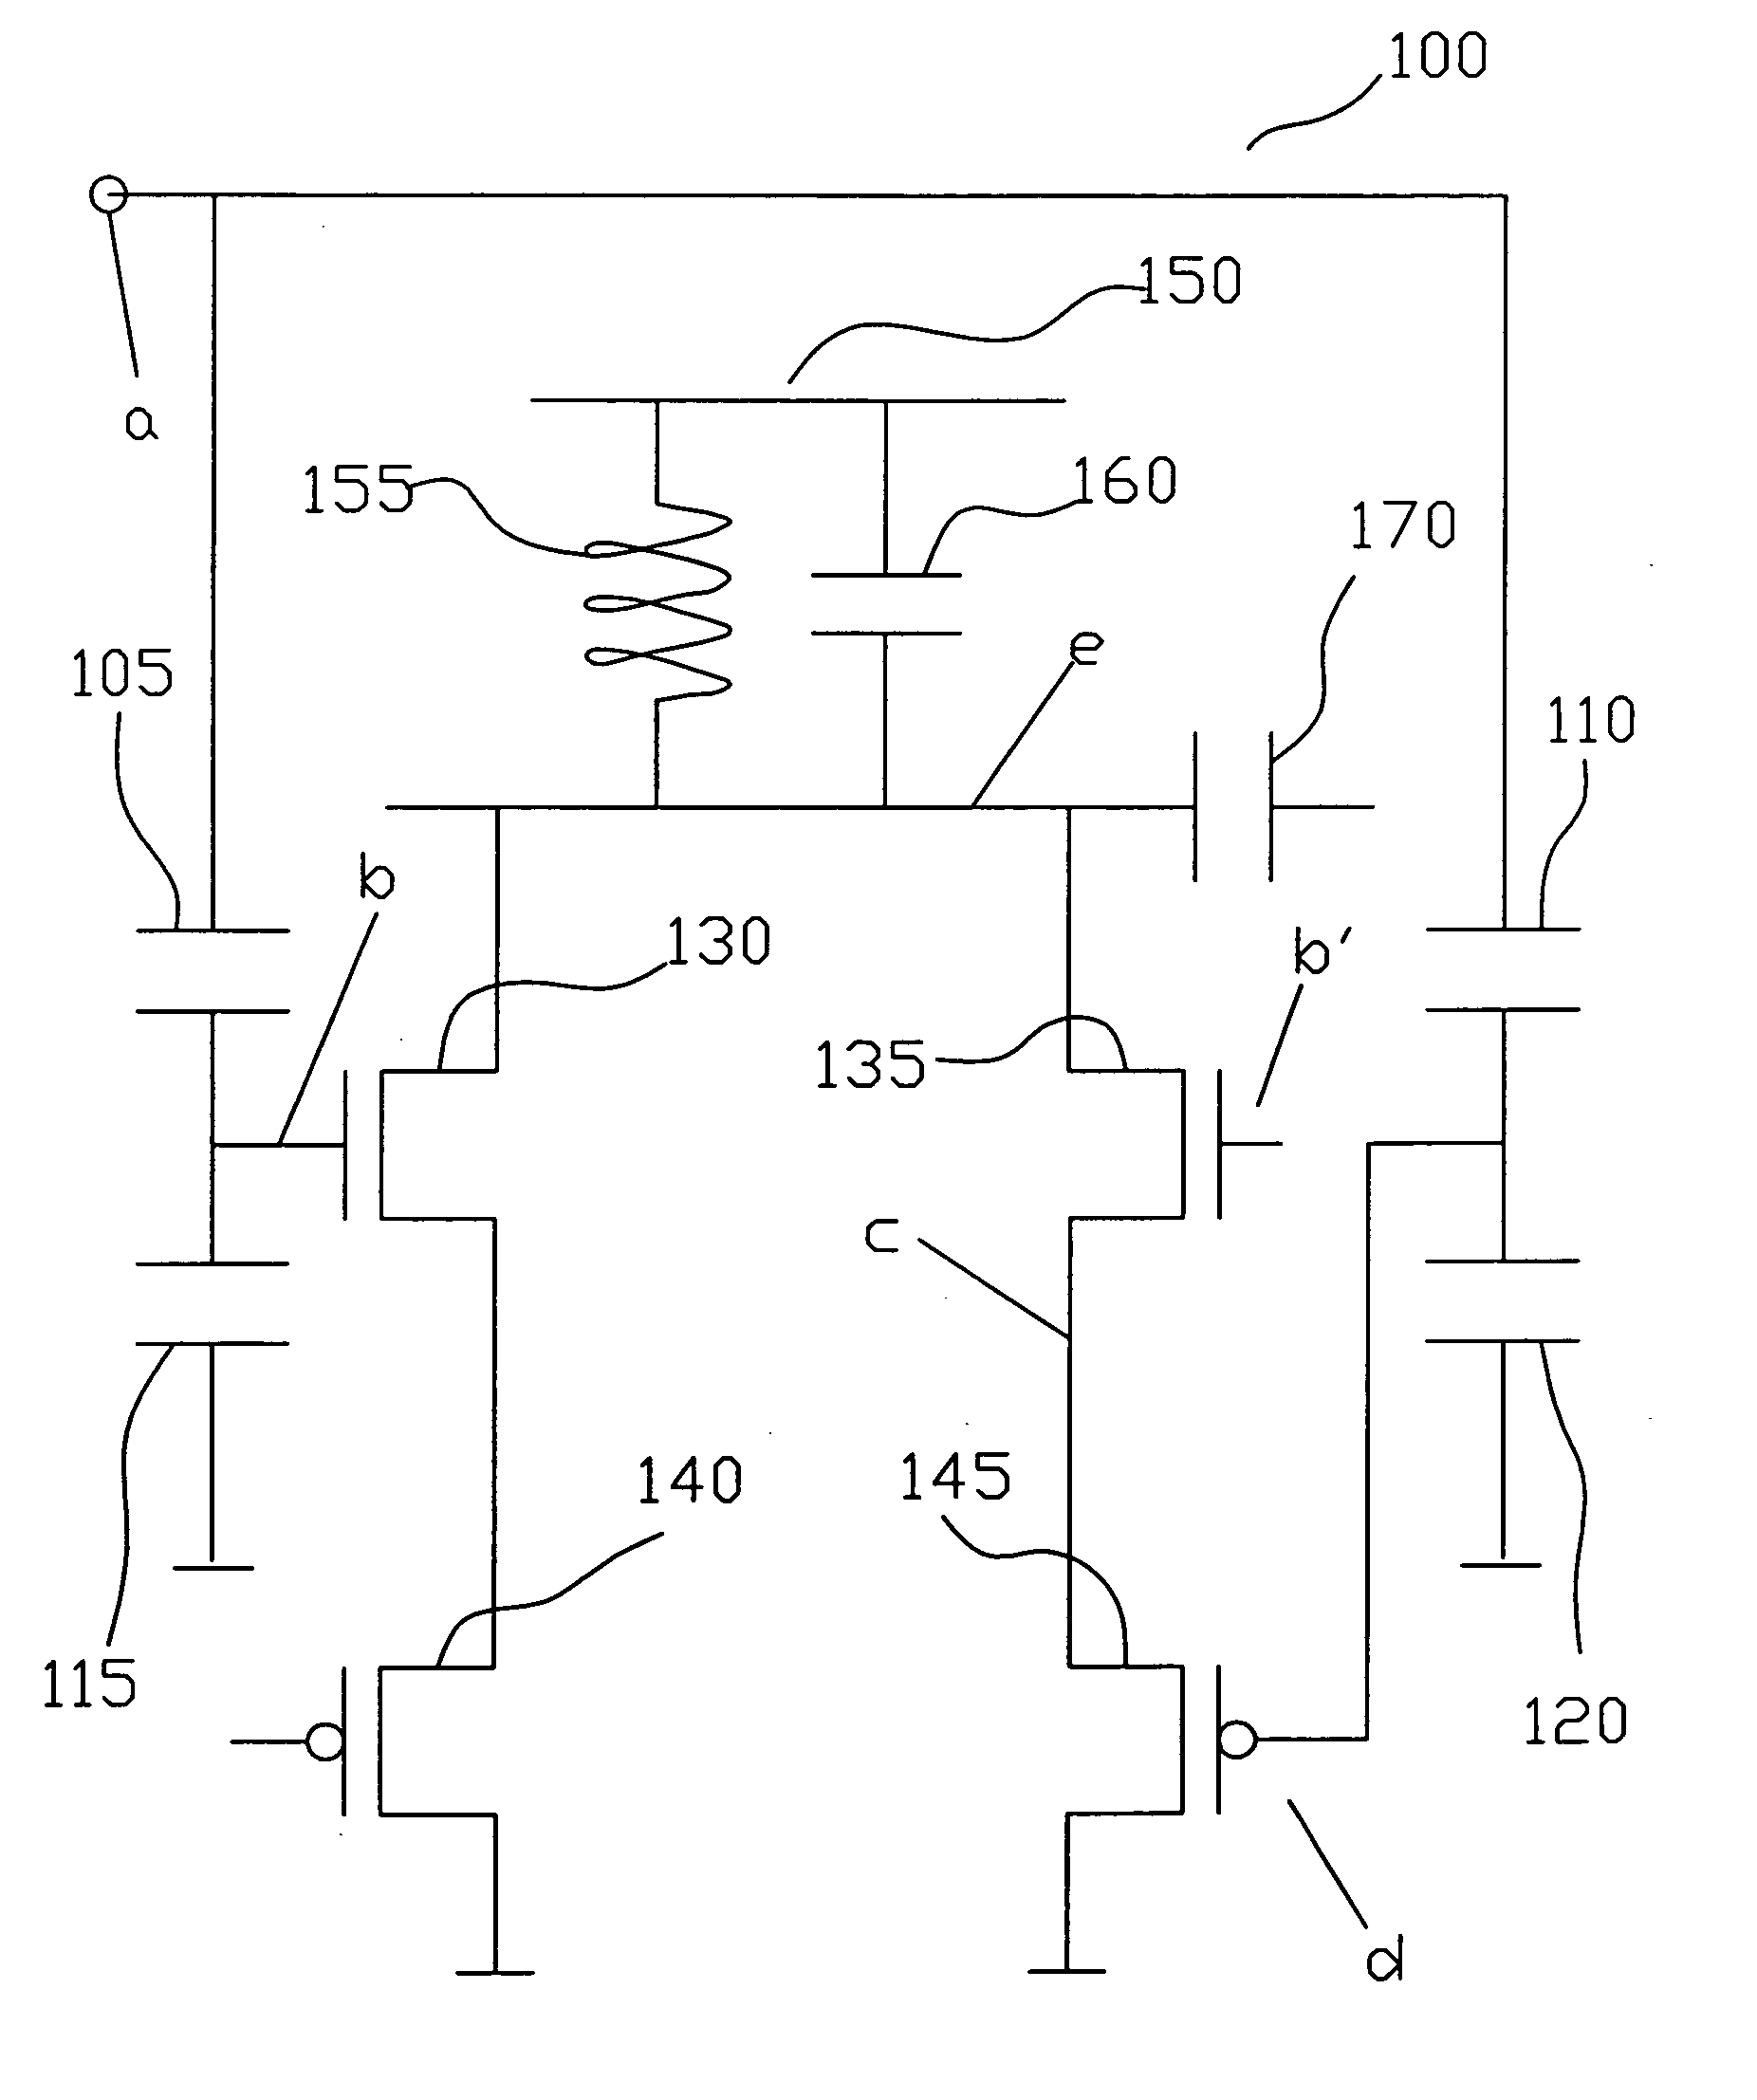 CMOS single-ended frequency doubler